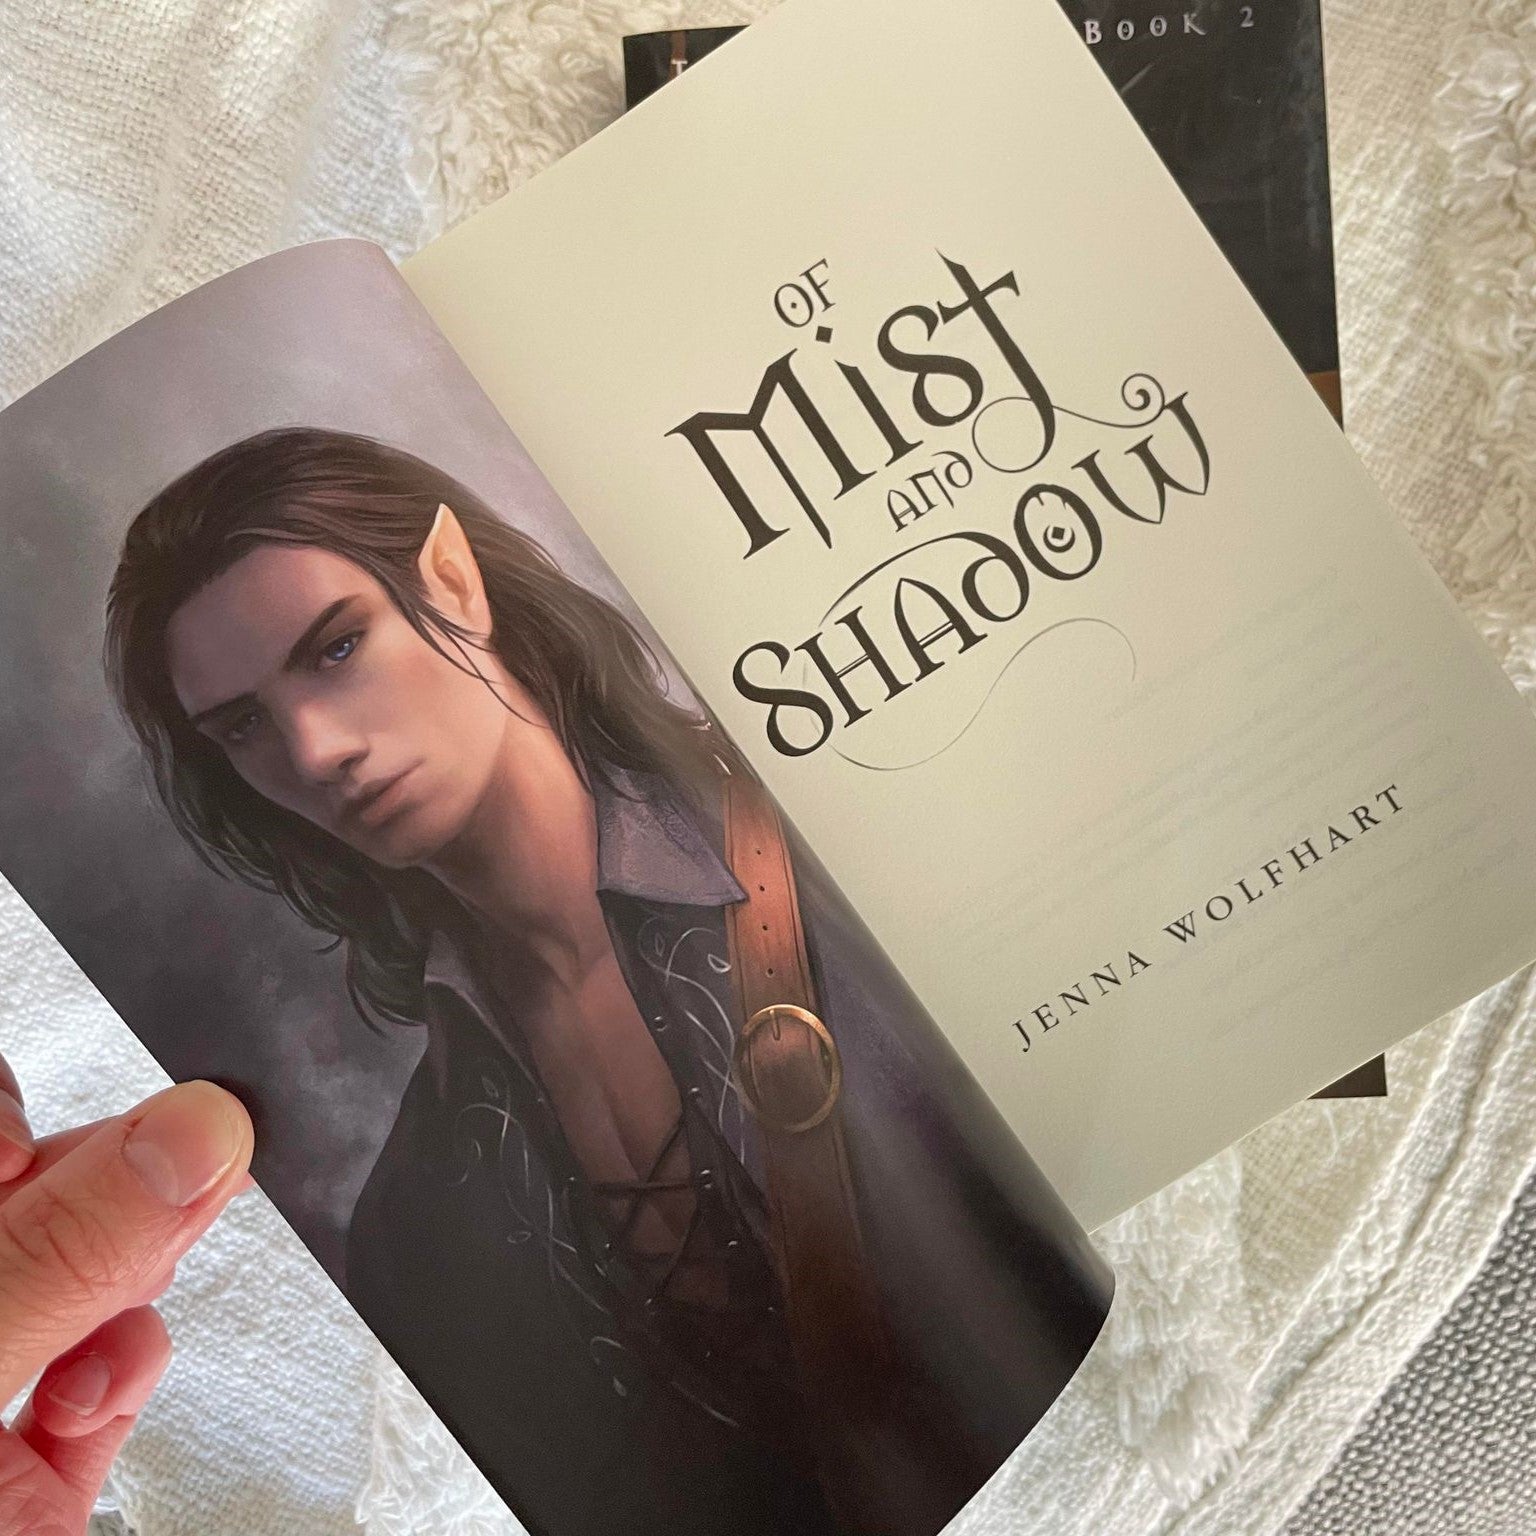 The Mist King by Jenna Wolfhart